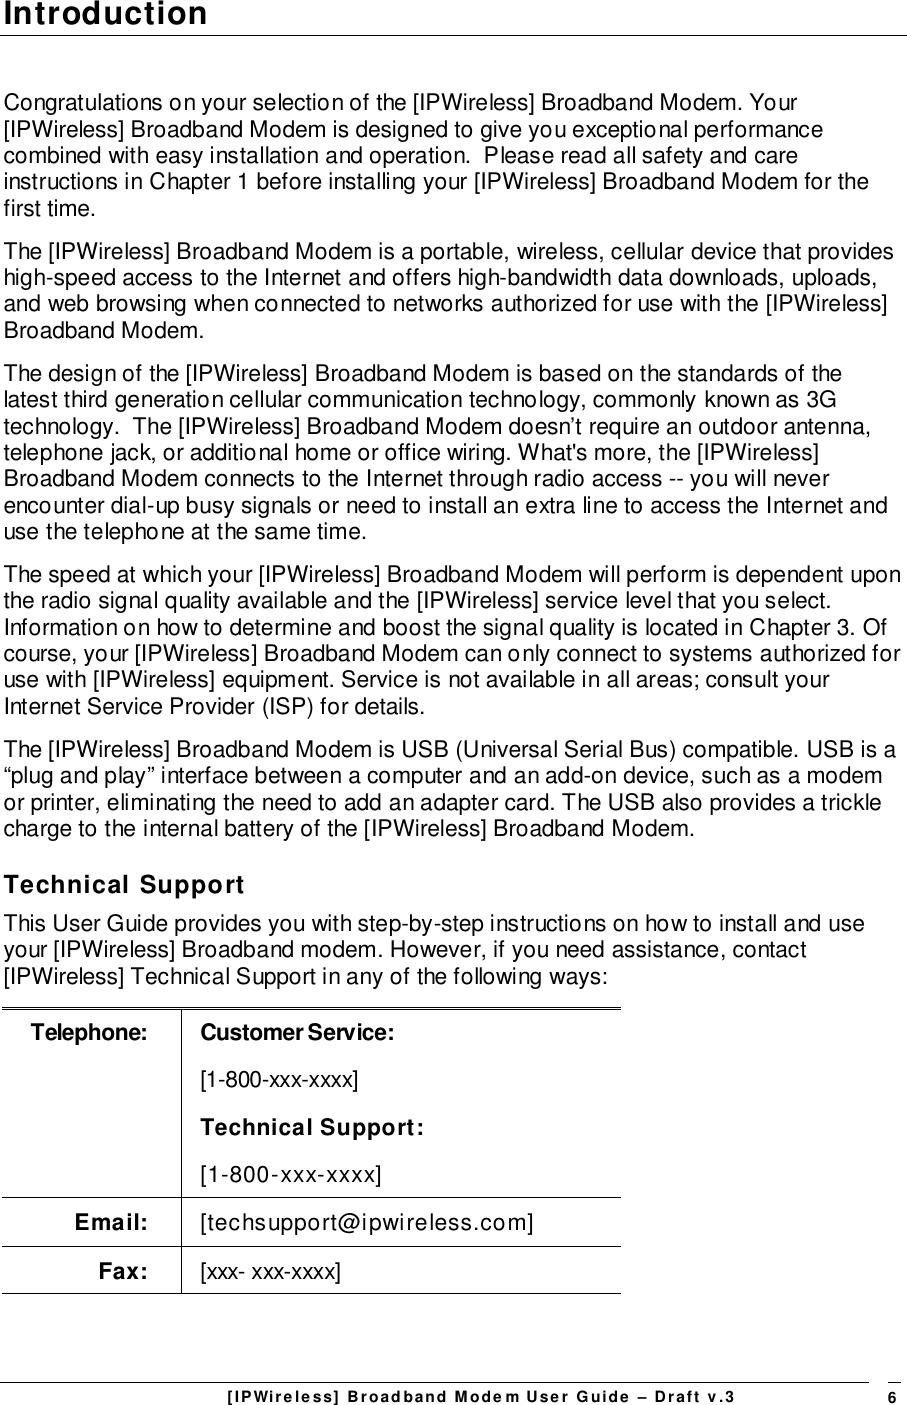 [IPWireless] Broadband Modem User Guide – Draft v.3 6IntroductionCongratulations on your selection of the [IPWireless] Broadband Modem. Your[IPWireless] Broadband Modem is designed to give you exceptional performancecombined with easy installation and operation.  Please read all safety and careinstructions in Chapter 1 before installing your [IPWireless] Broadband Modem for thefirst time.The [IPWireless] Broadband Modem is a portable, wireless, cellular device that provideshigh-speed access to the Internet and offers high-bandwidth data downloads, uploads,and web browsing when connected to networks authorized for use with the [IPWireless]Broadband Modem.The design of the [IPWireless] Broadband Modem is based on the standards of thelatest third generation cellular communication technology, commonly known as 3Gtechnology.  The [IPWireless] Broadband Modem doesn’t require an outdoor antenna,telephone jack, or additional home or office wiring. What&apos;s more, the [IPWireless]Broadband Modem connects to the Internet through radio access -- you will neverencounter dial-up busy signals or need to install an extra line to access the Internet anduse the telephone at the same time.The speed at which your [IPWireless] Broadband Modem will perform is dependent uponthe radio signal quality available and the [IPWireless] service level that you select.Information on how to determine and boost the signal quality is located in Chapter 3. Ofcourse, your [IPWireless] Broadband Modem can only connect to systems authorized foruse with [IPWireless] equipment. Service is not available in all areas; consult yourInternet Service Provider (ISP) for details.The [IPWireless] Broadband Modem is USB (Universal Serial Bus) compatible. USB is a“plug and play” interface between a computer and an add-on device, such as a modemor printer, eliminating the need to add an adapter card. The USB also provides a tricklecharge to the internal battery of the [IPWireless] Broadband Modem.Technical SupportThis User Guide provides you with step-by-step instructions on how to install and useyour [IPWireless] Broadband modem. However, if you need assistance, contact[IPWireless] Technical Support in any of the following ways:Telephone: Customer Service:[1-800-xxx-xxxx]Technical Support:[1-800-xxx-xxxx]Email: [techsupport@ipwireless.com]Fax: [xxx- xxx-xxxx]